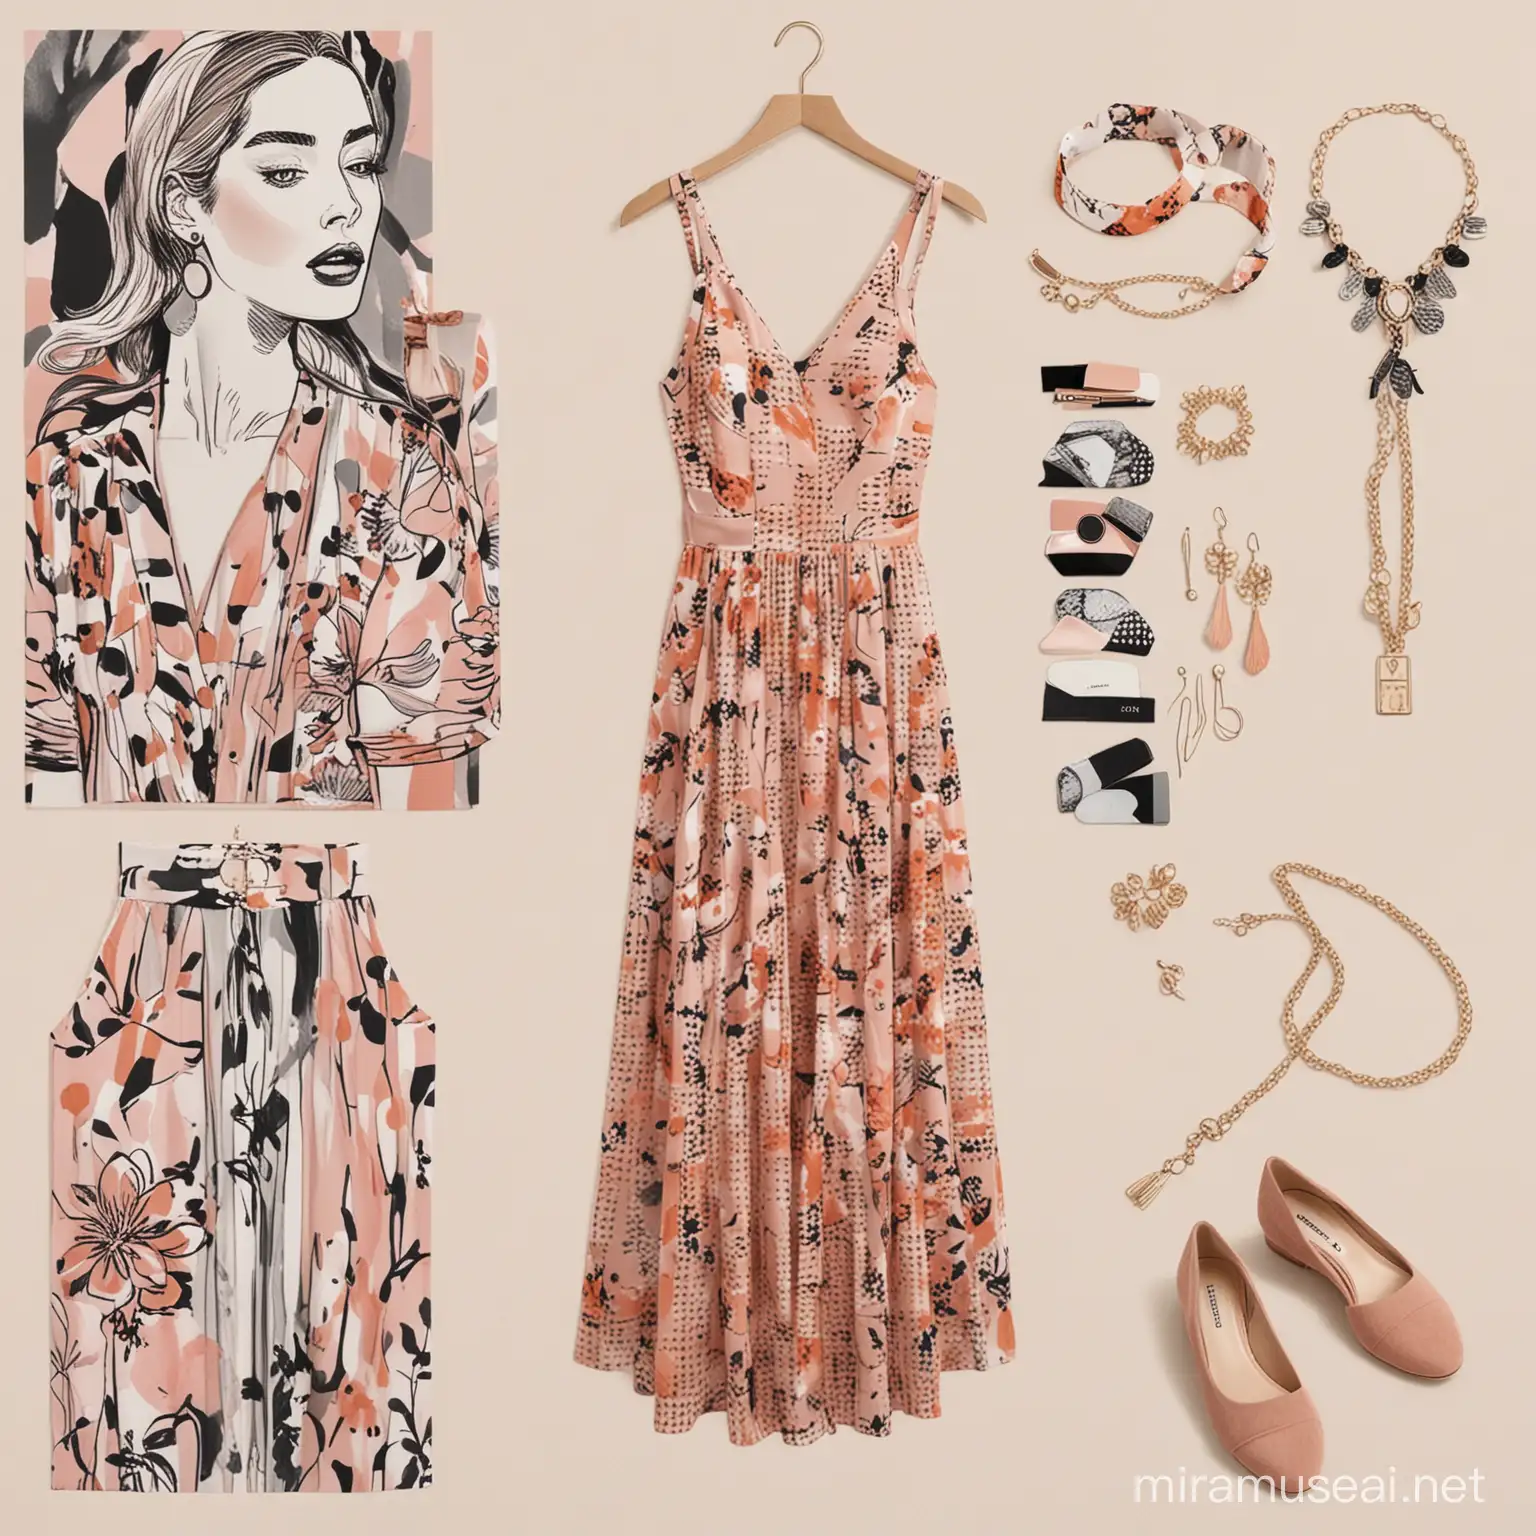 Fashion Illustration Styling Tips Board for Women with Abstract Floral Print Midaxi Dress and Accessories